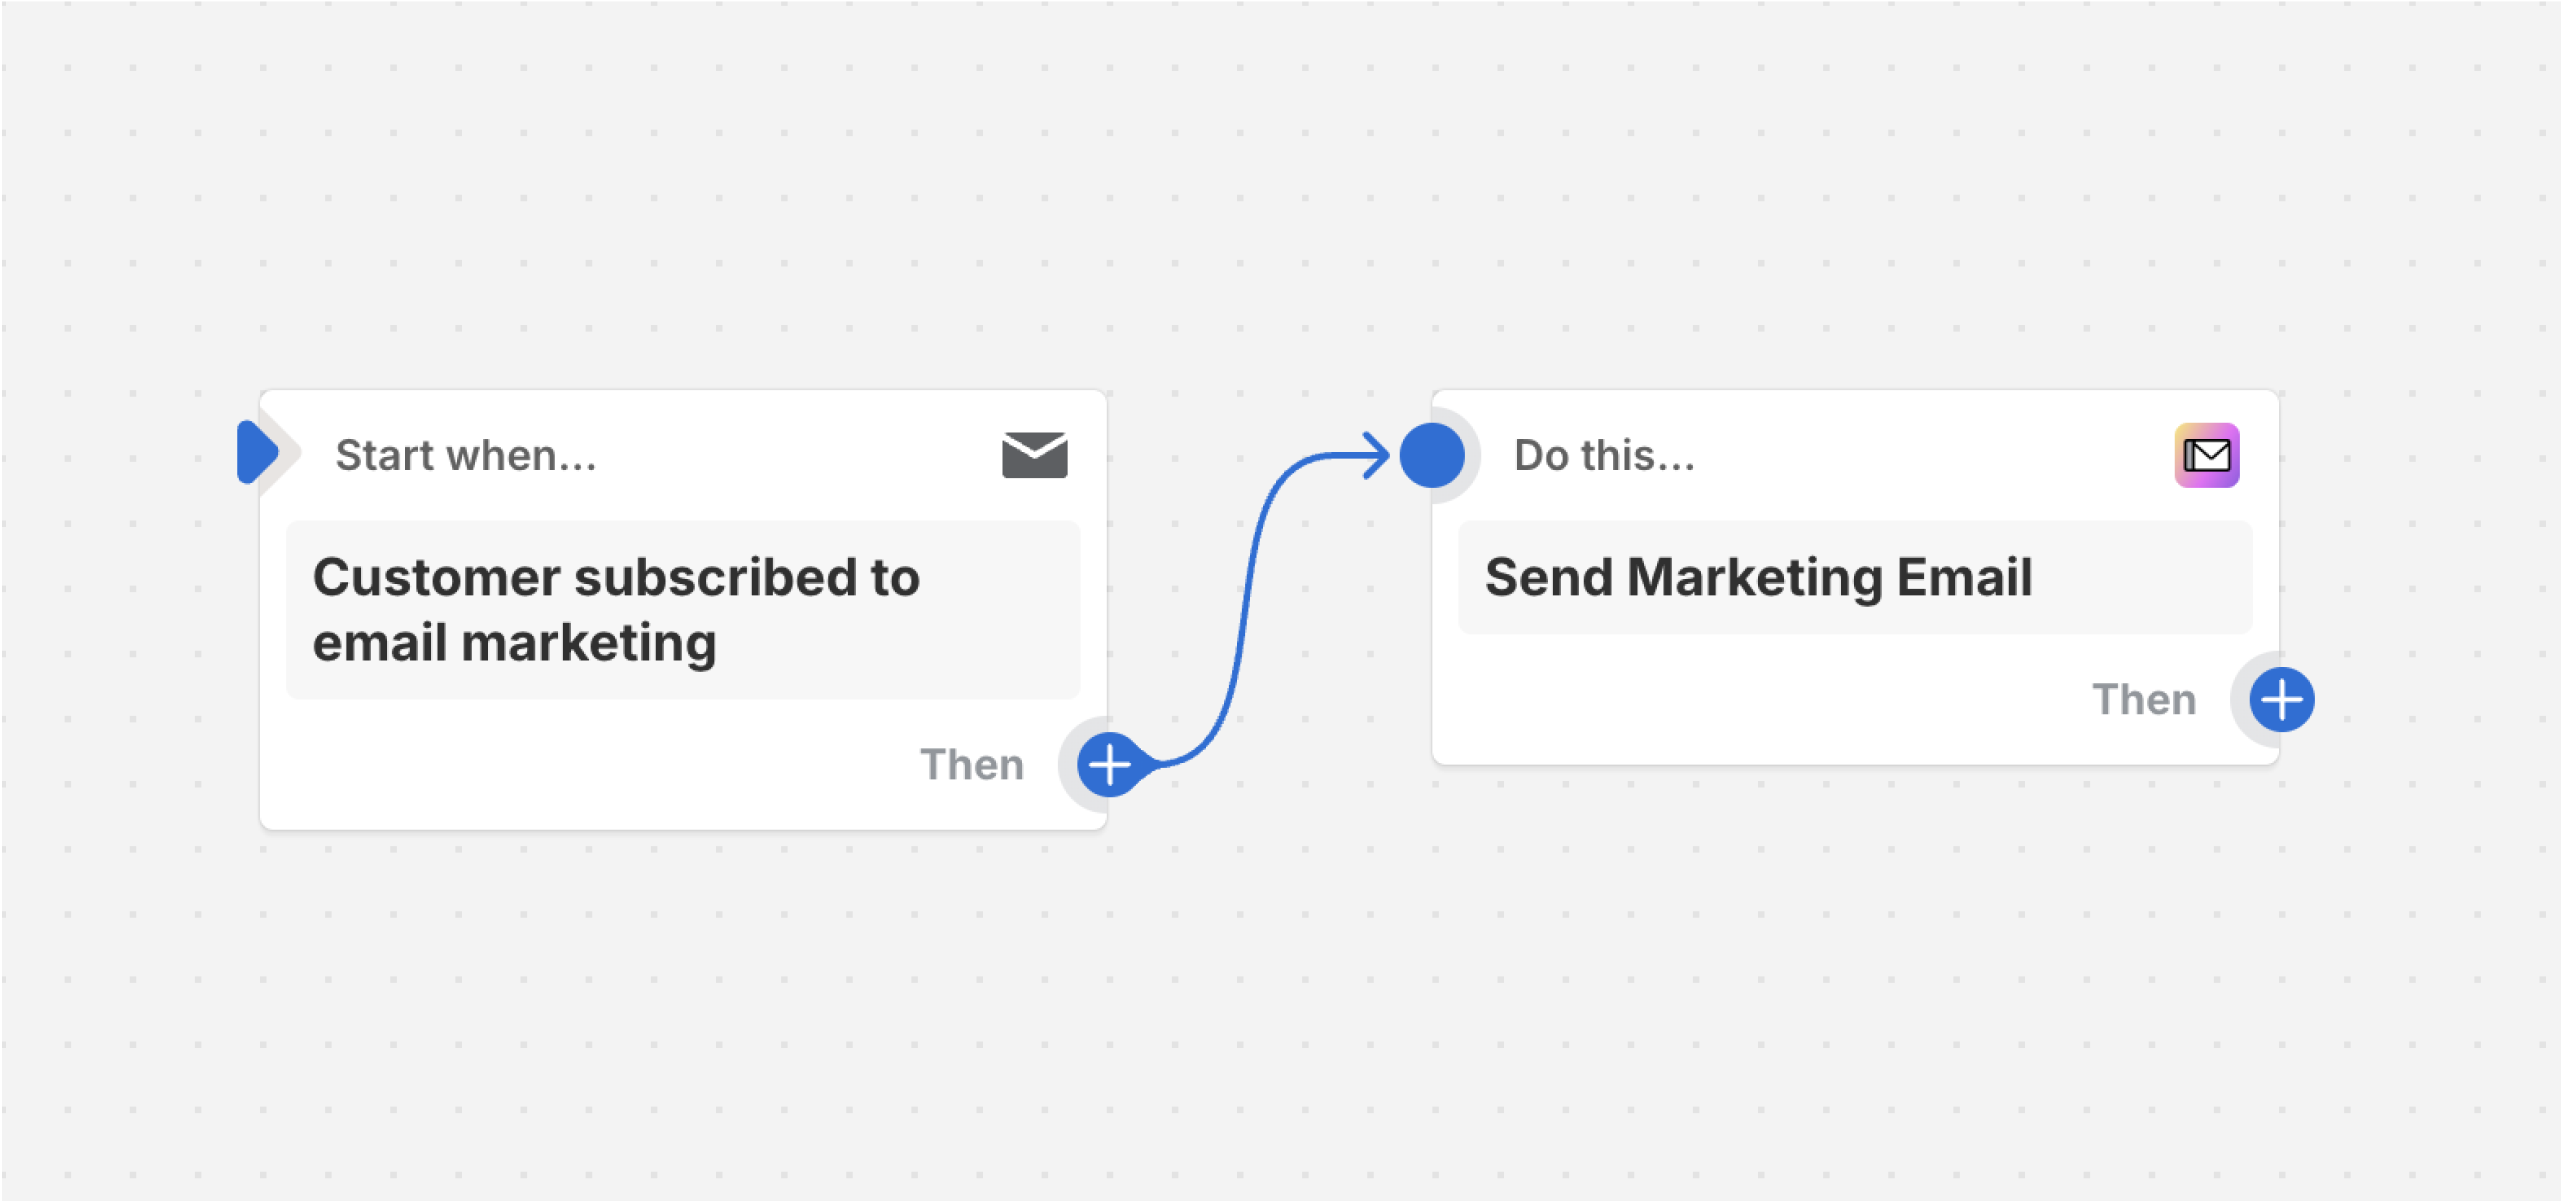 Example of a workflow that sends a marketing email after a customer subscribes to email marketing